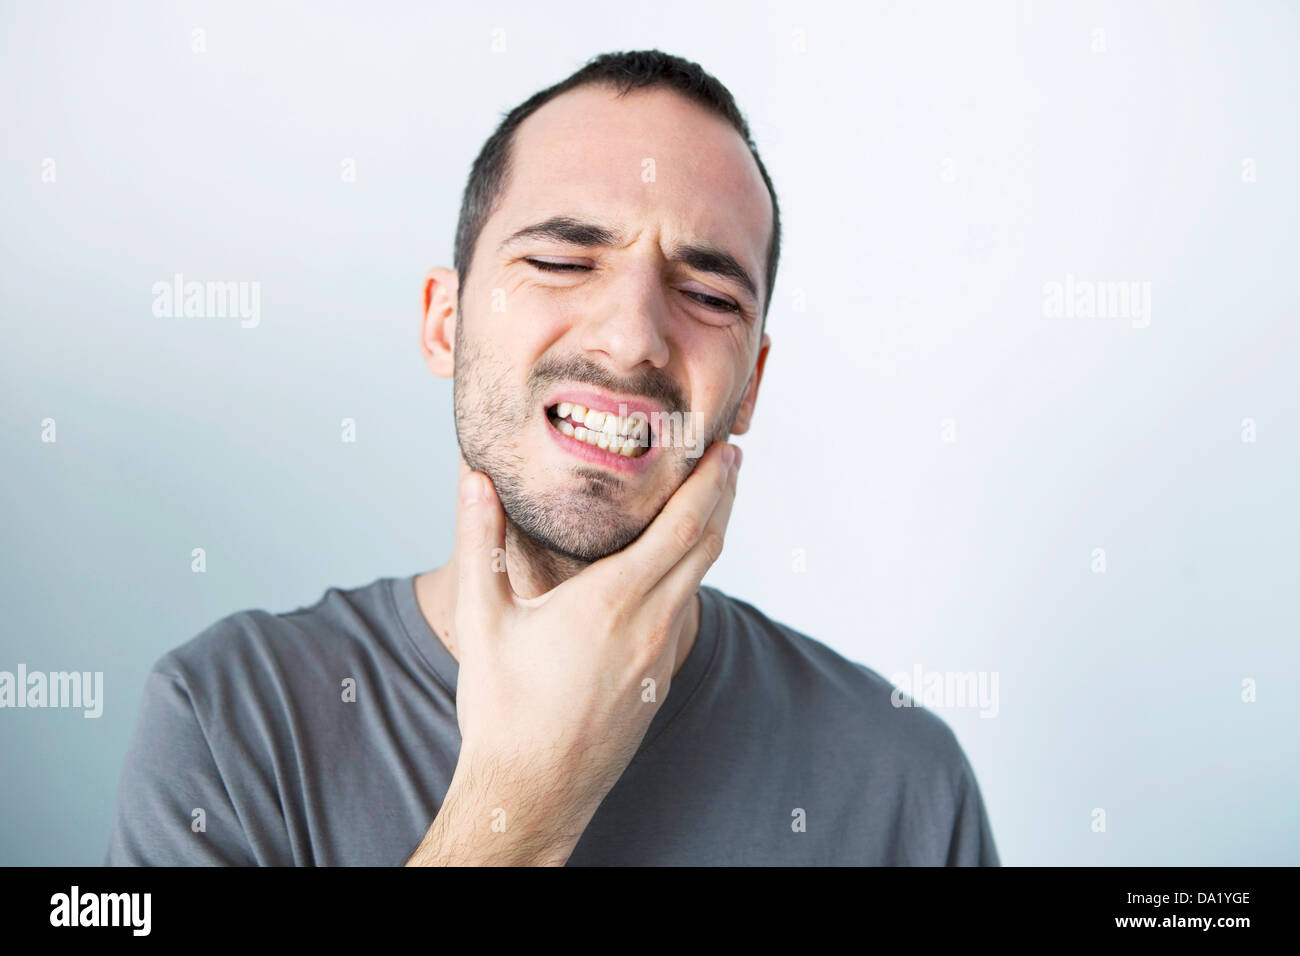 MAN WITH TOOTHACHE Stock Photo